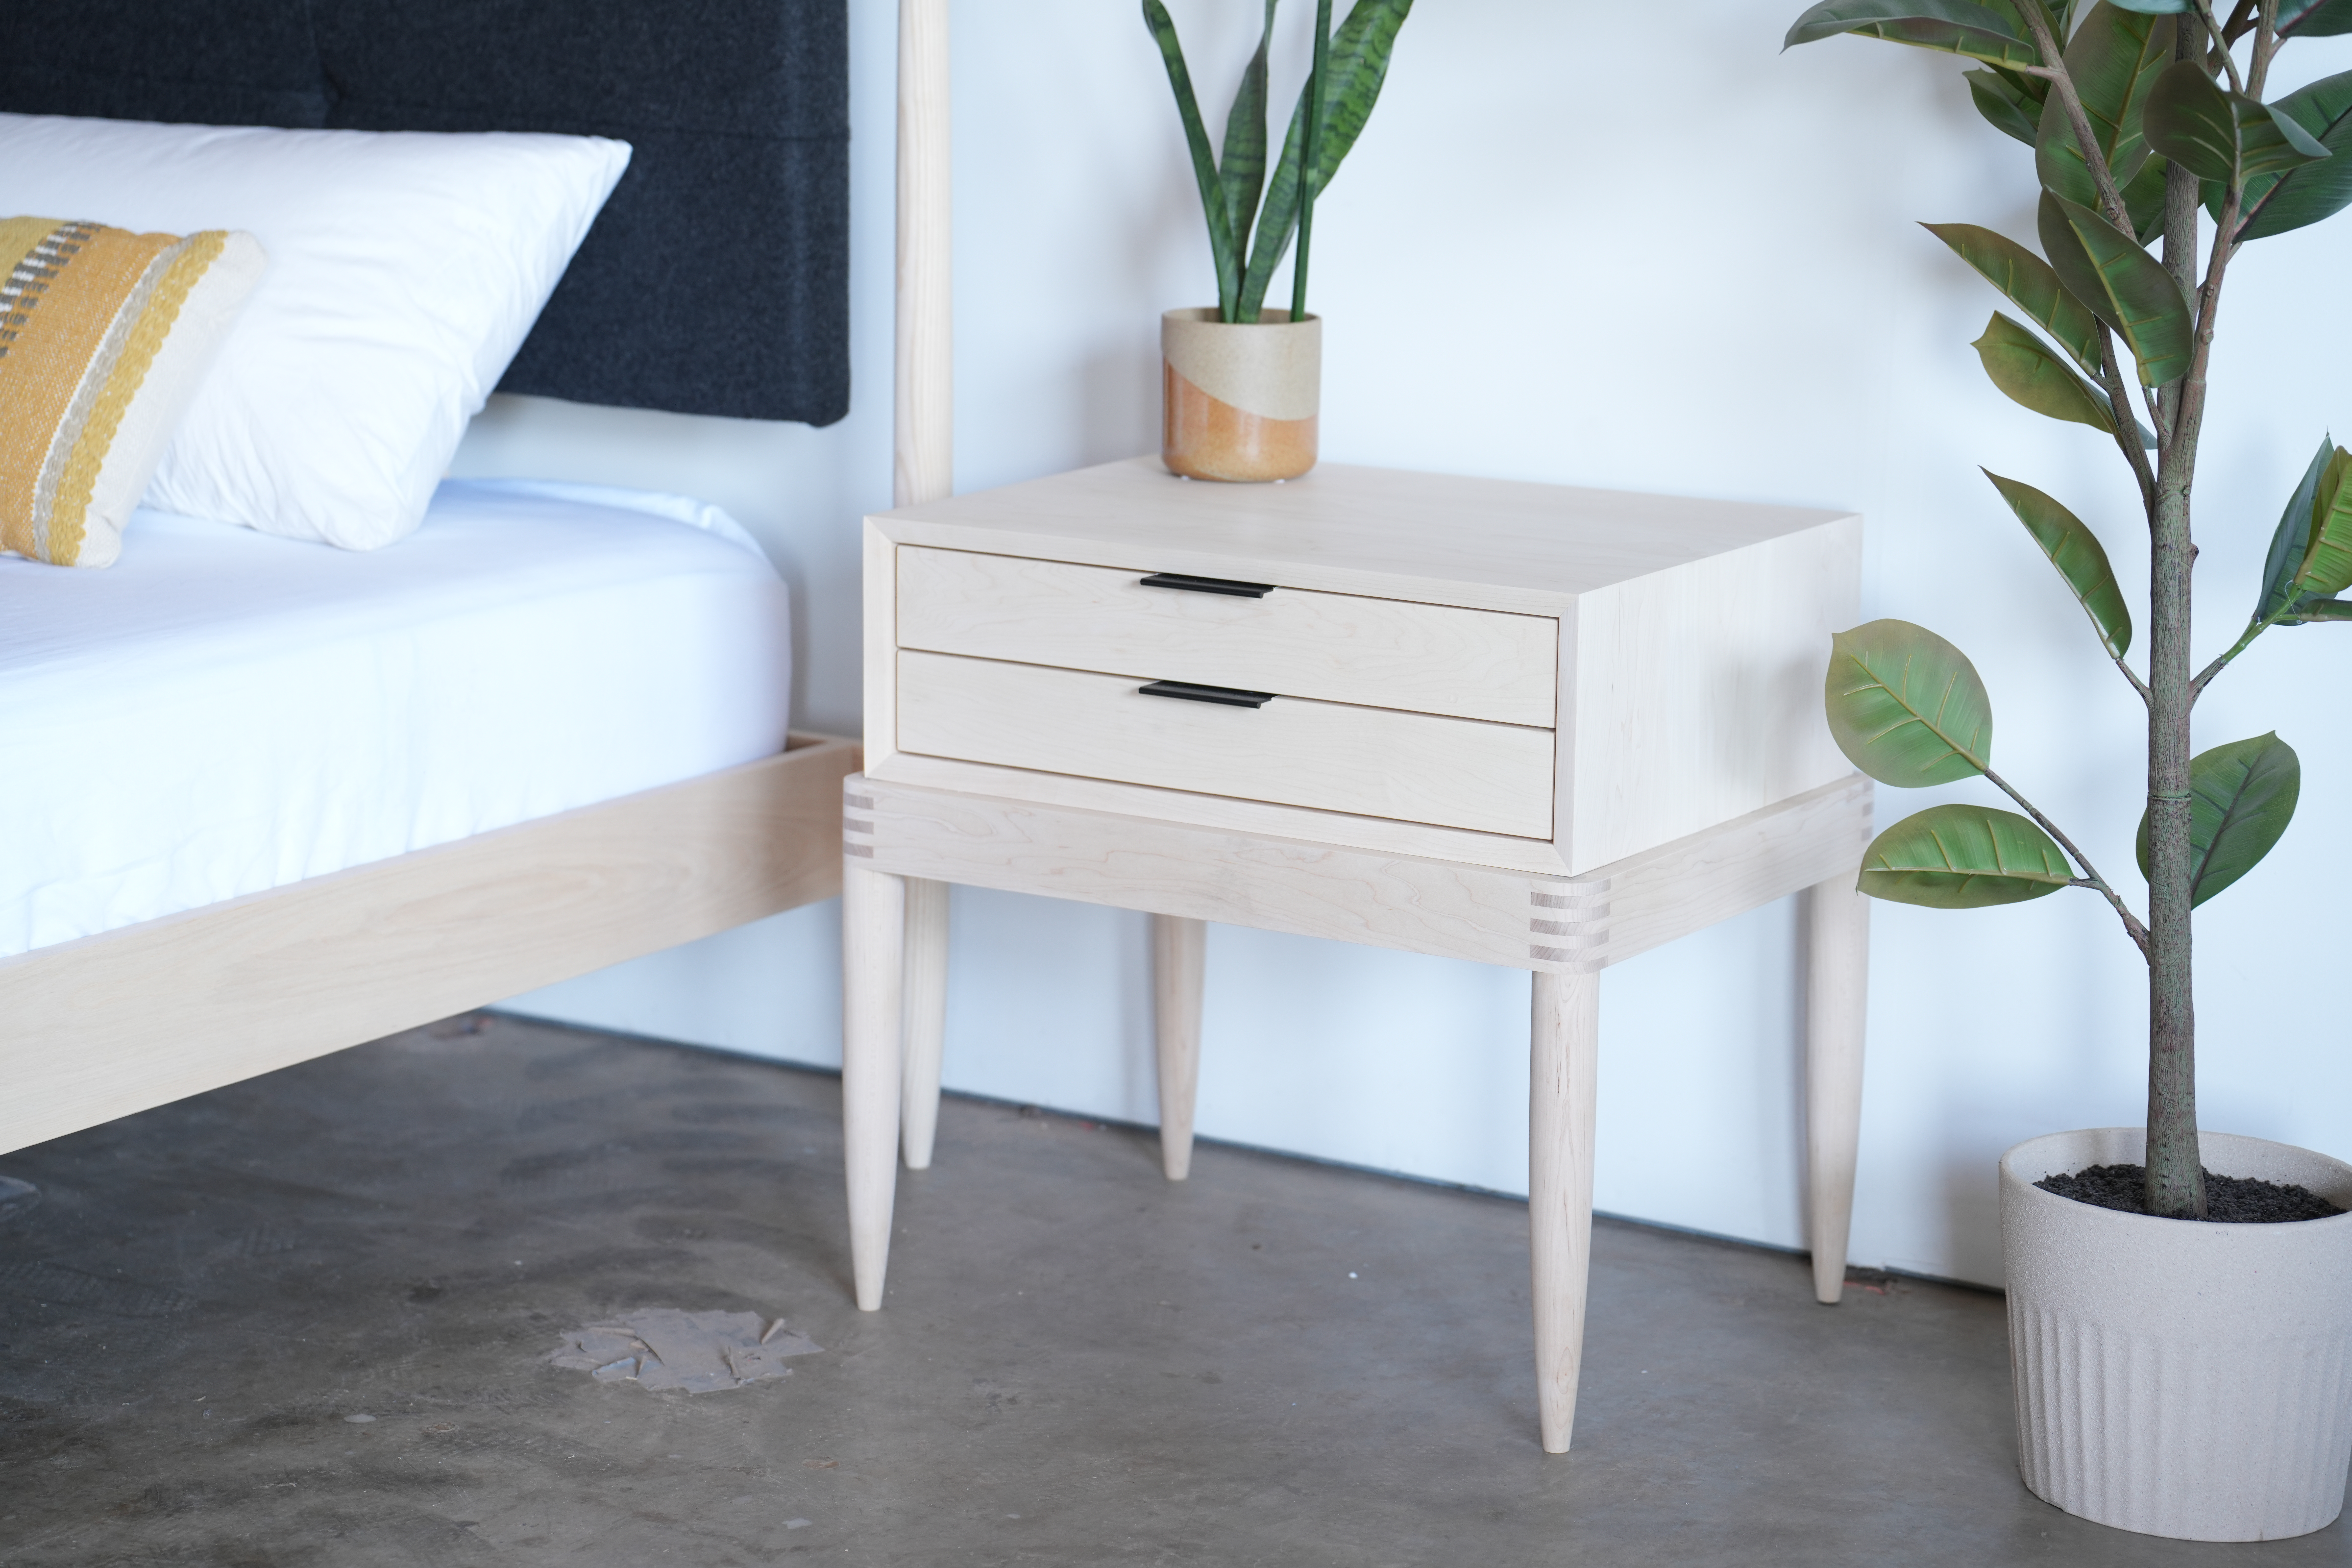 A maple nightstand with two drawers and black pulls.